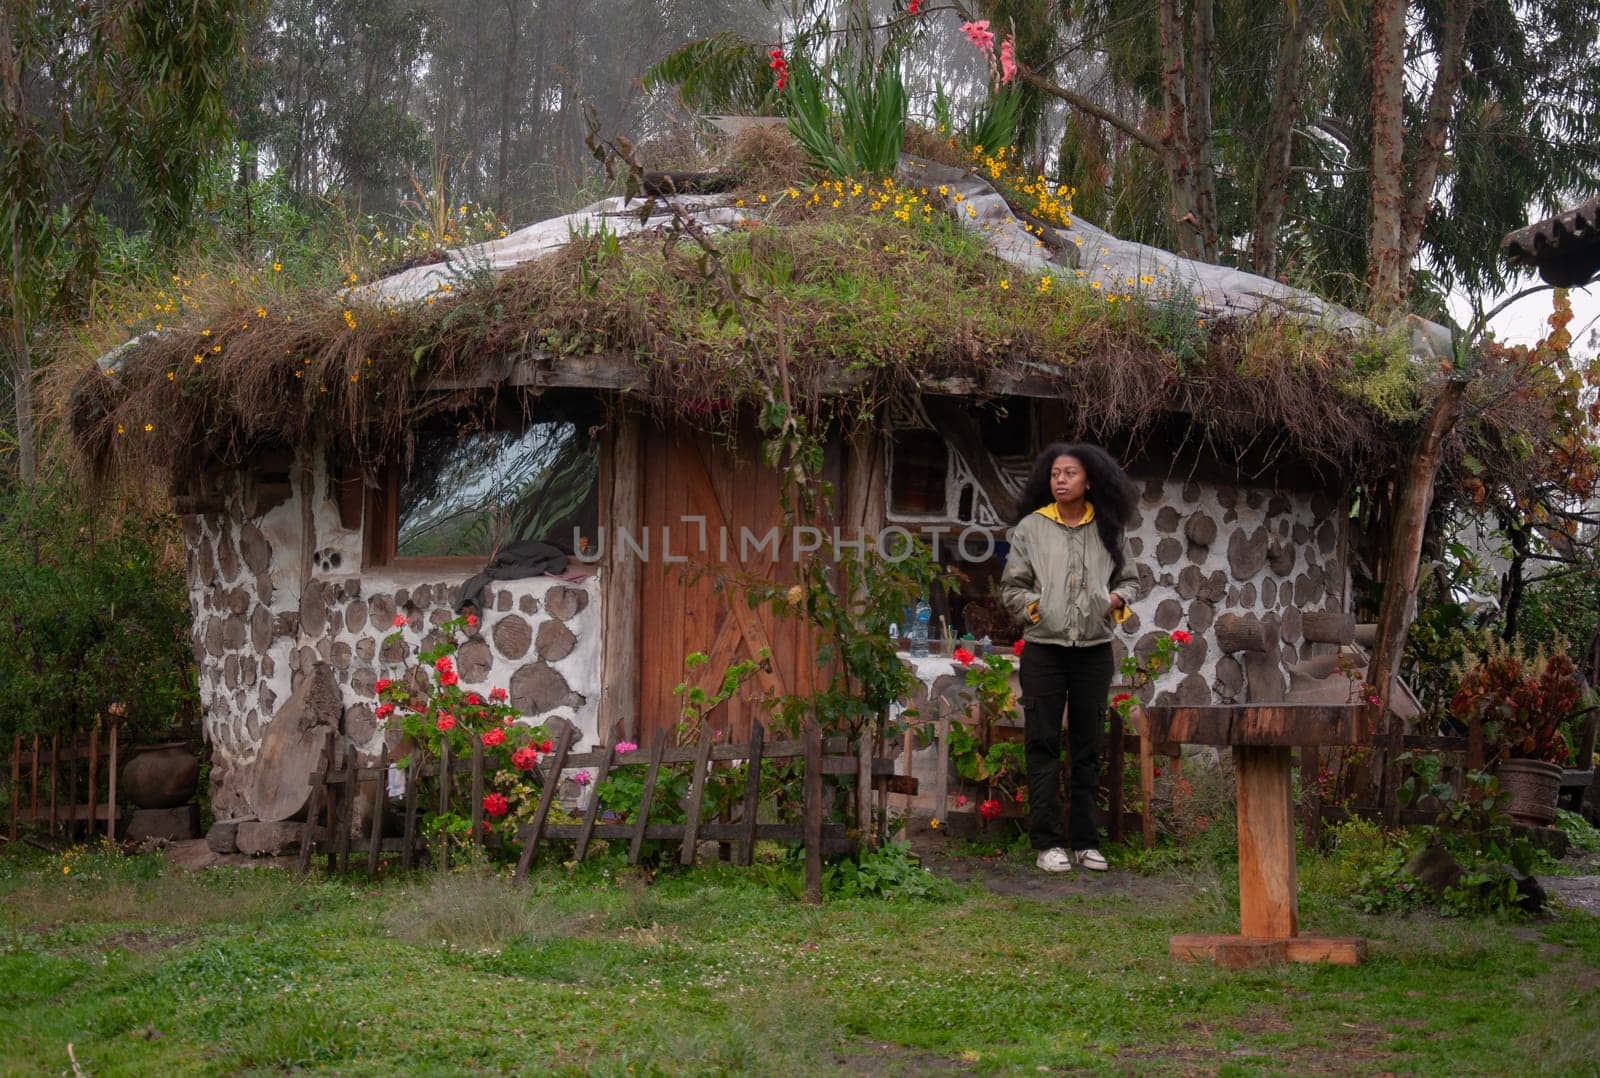 paradisiacal rural tourism: african-american woman staying in a cabin in a rural resort where the cabins are round and the roof is adorned with colorful flowers. tourism day by Raulmartin